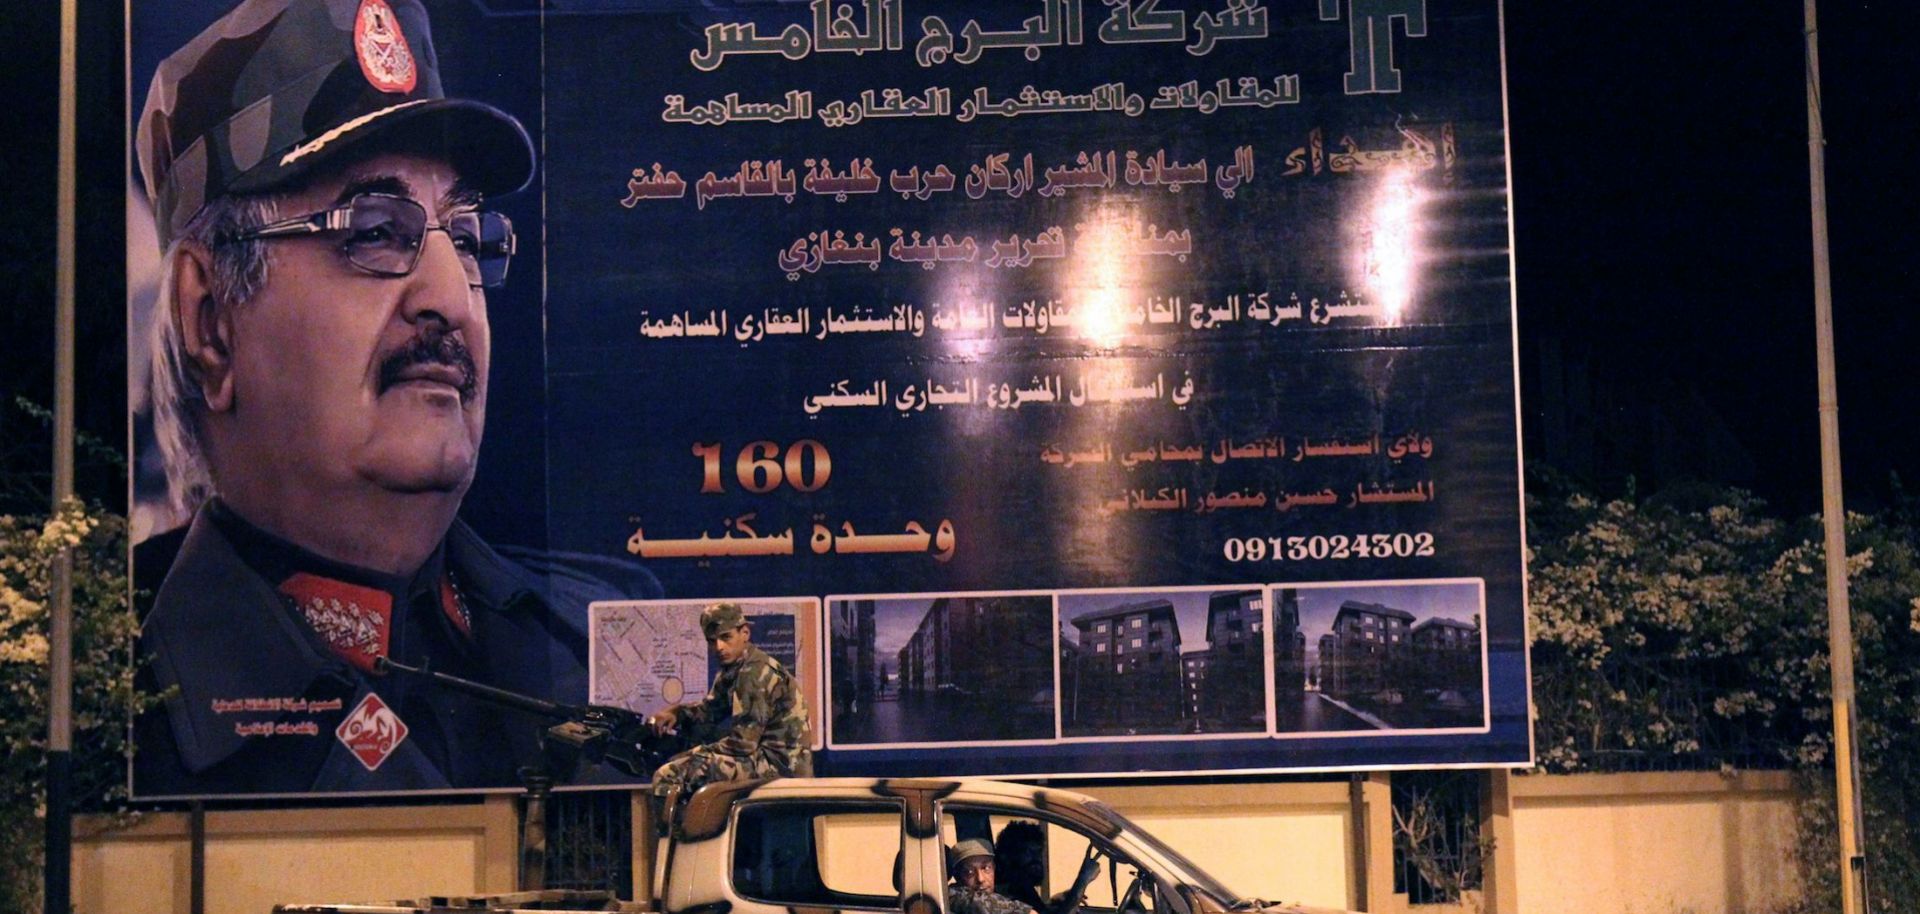 Members of the Libyan Special Forces, who are loyal to Khalifa Hifter, ride in a pickup truck past a billboard bearing the strongman's image in Benghazi during September 2017.